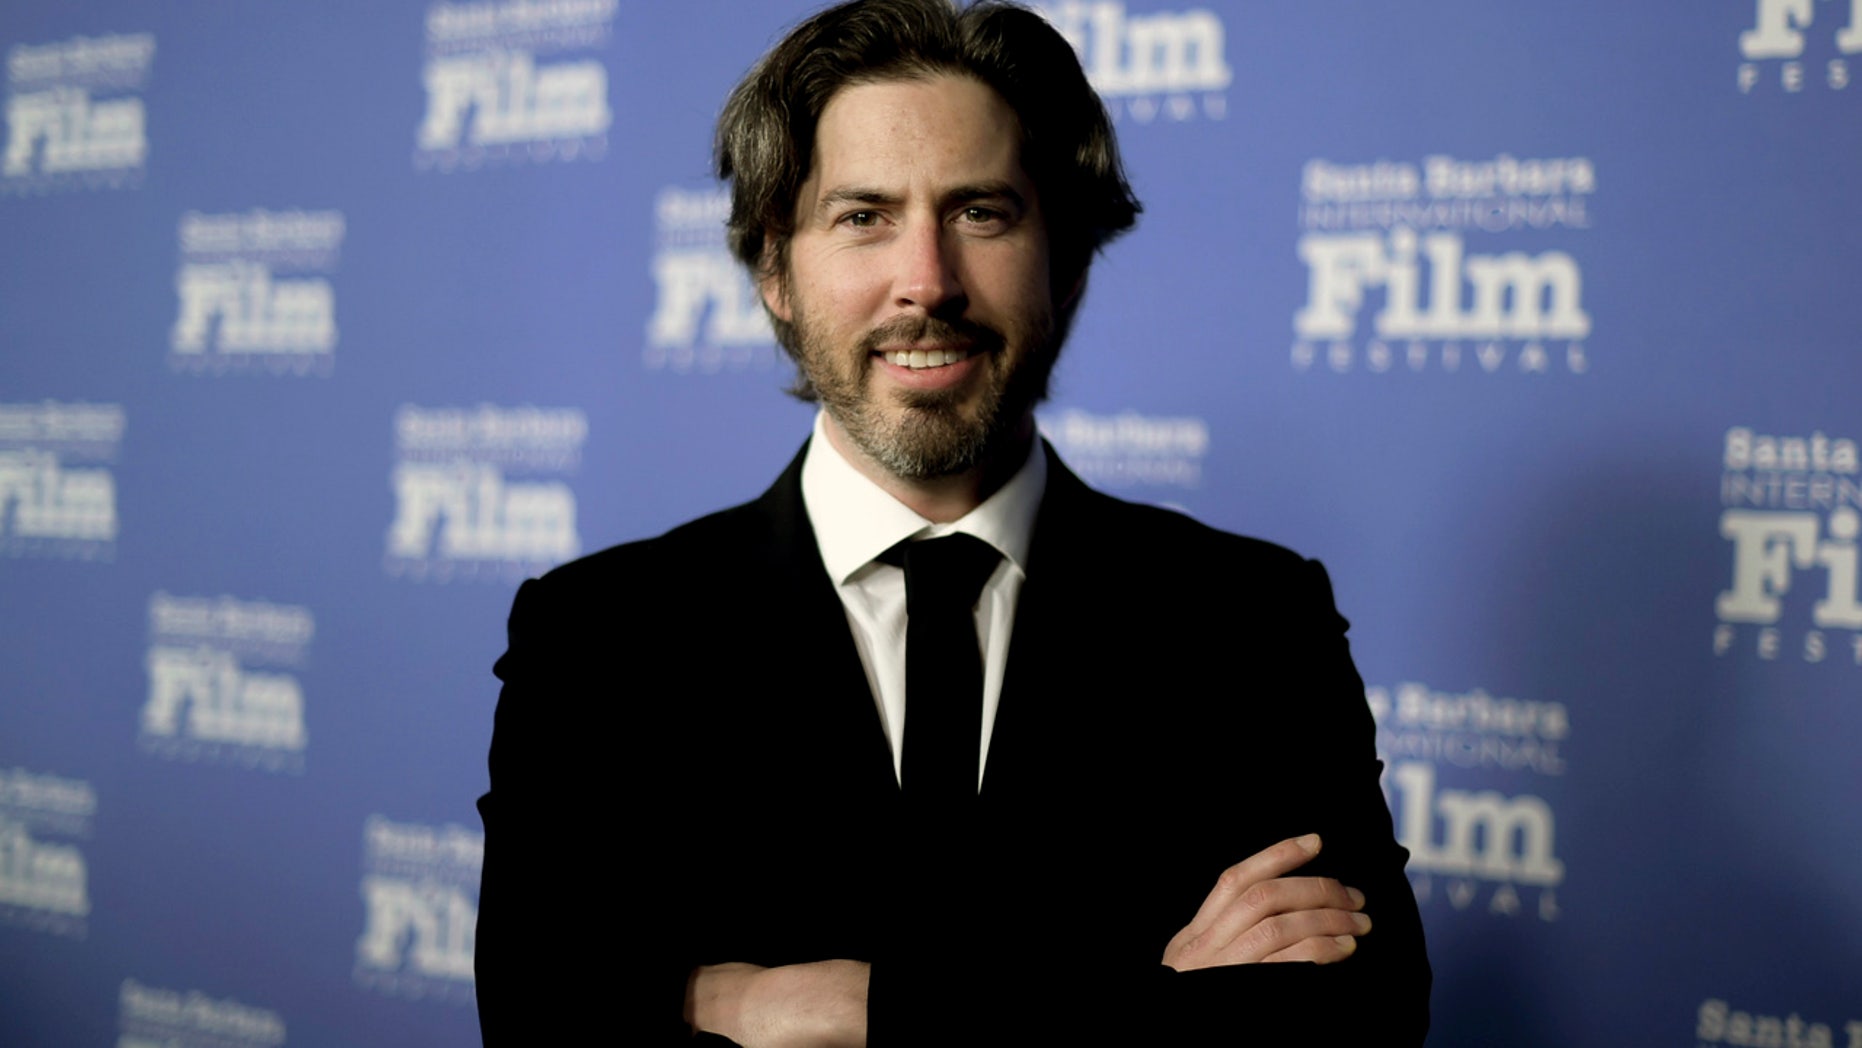 Director Jason Reitman receives negative reactions about his new film 